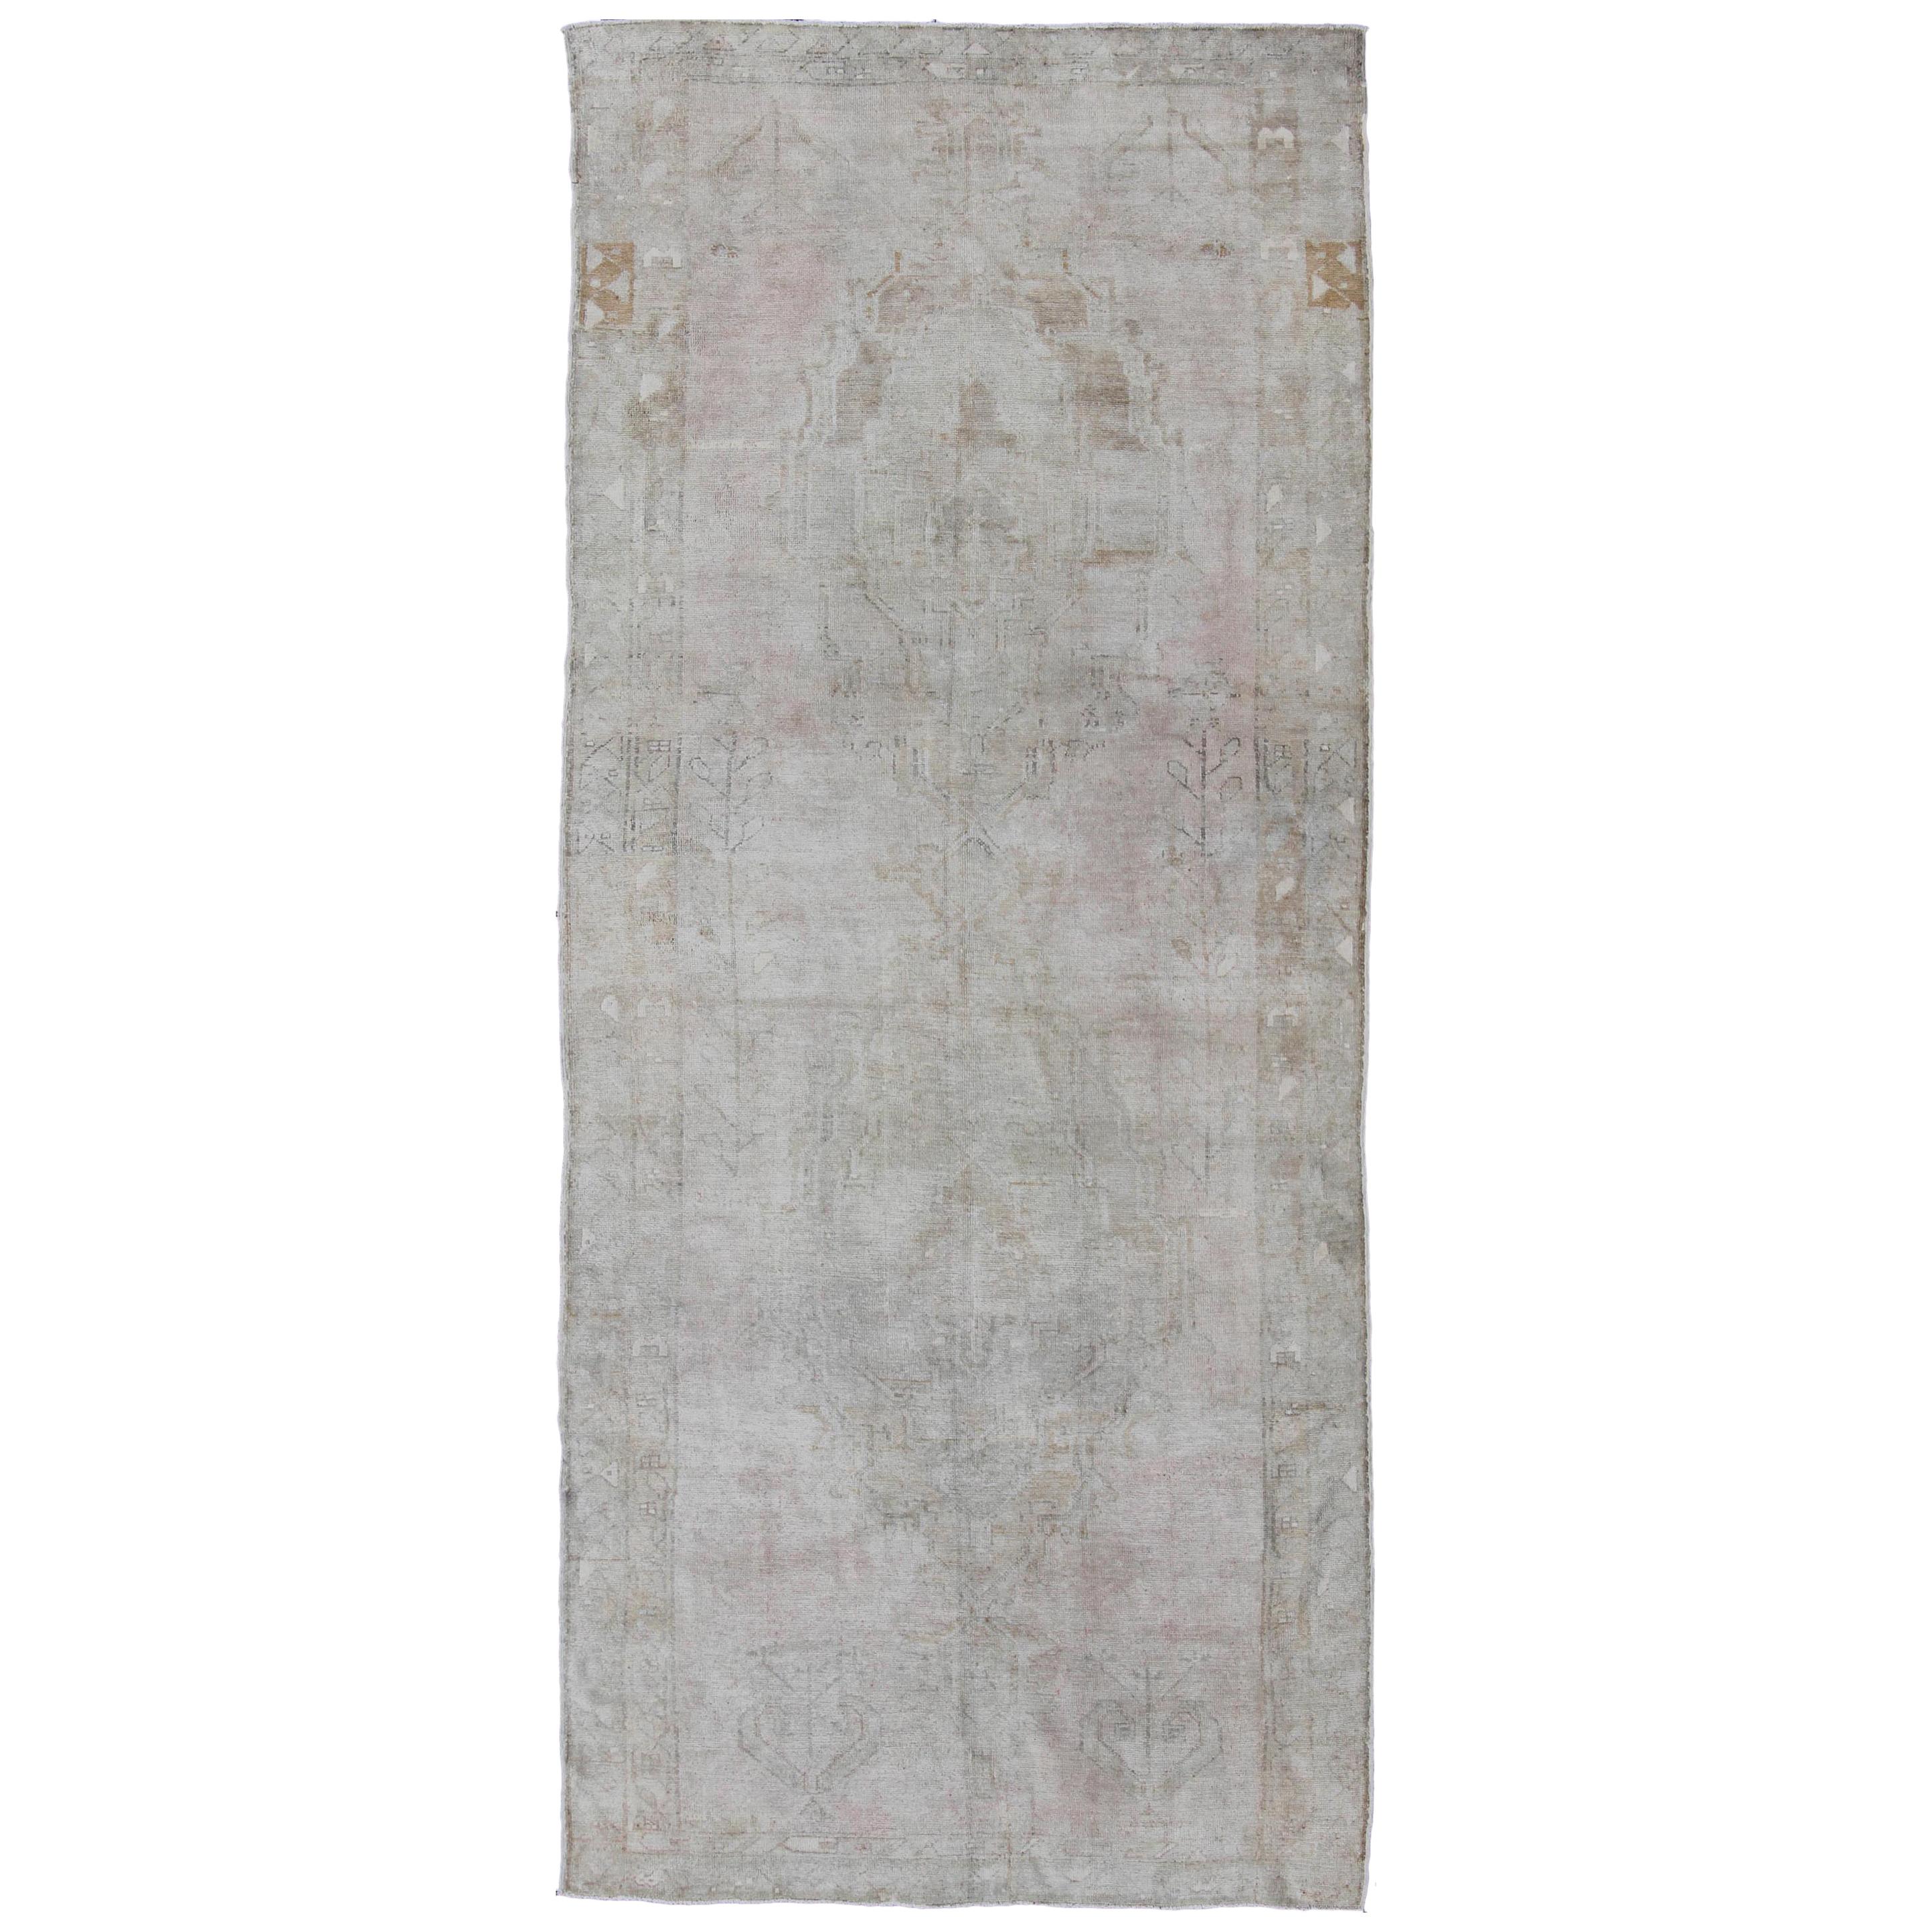 Wide Turkish Oushak Gallery Rug in Muted Tones with All-Over Design